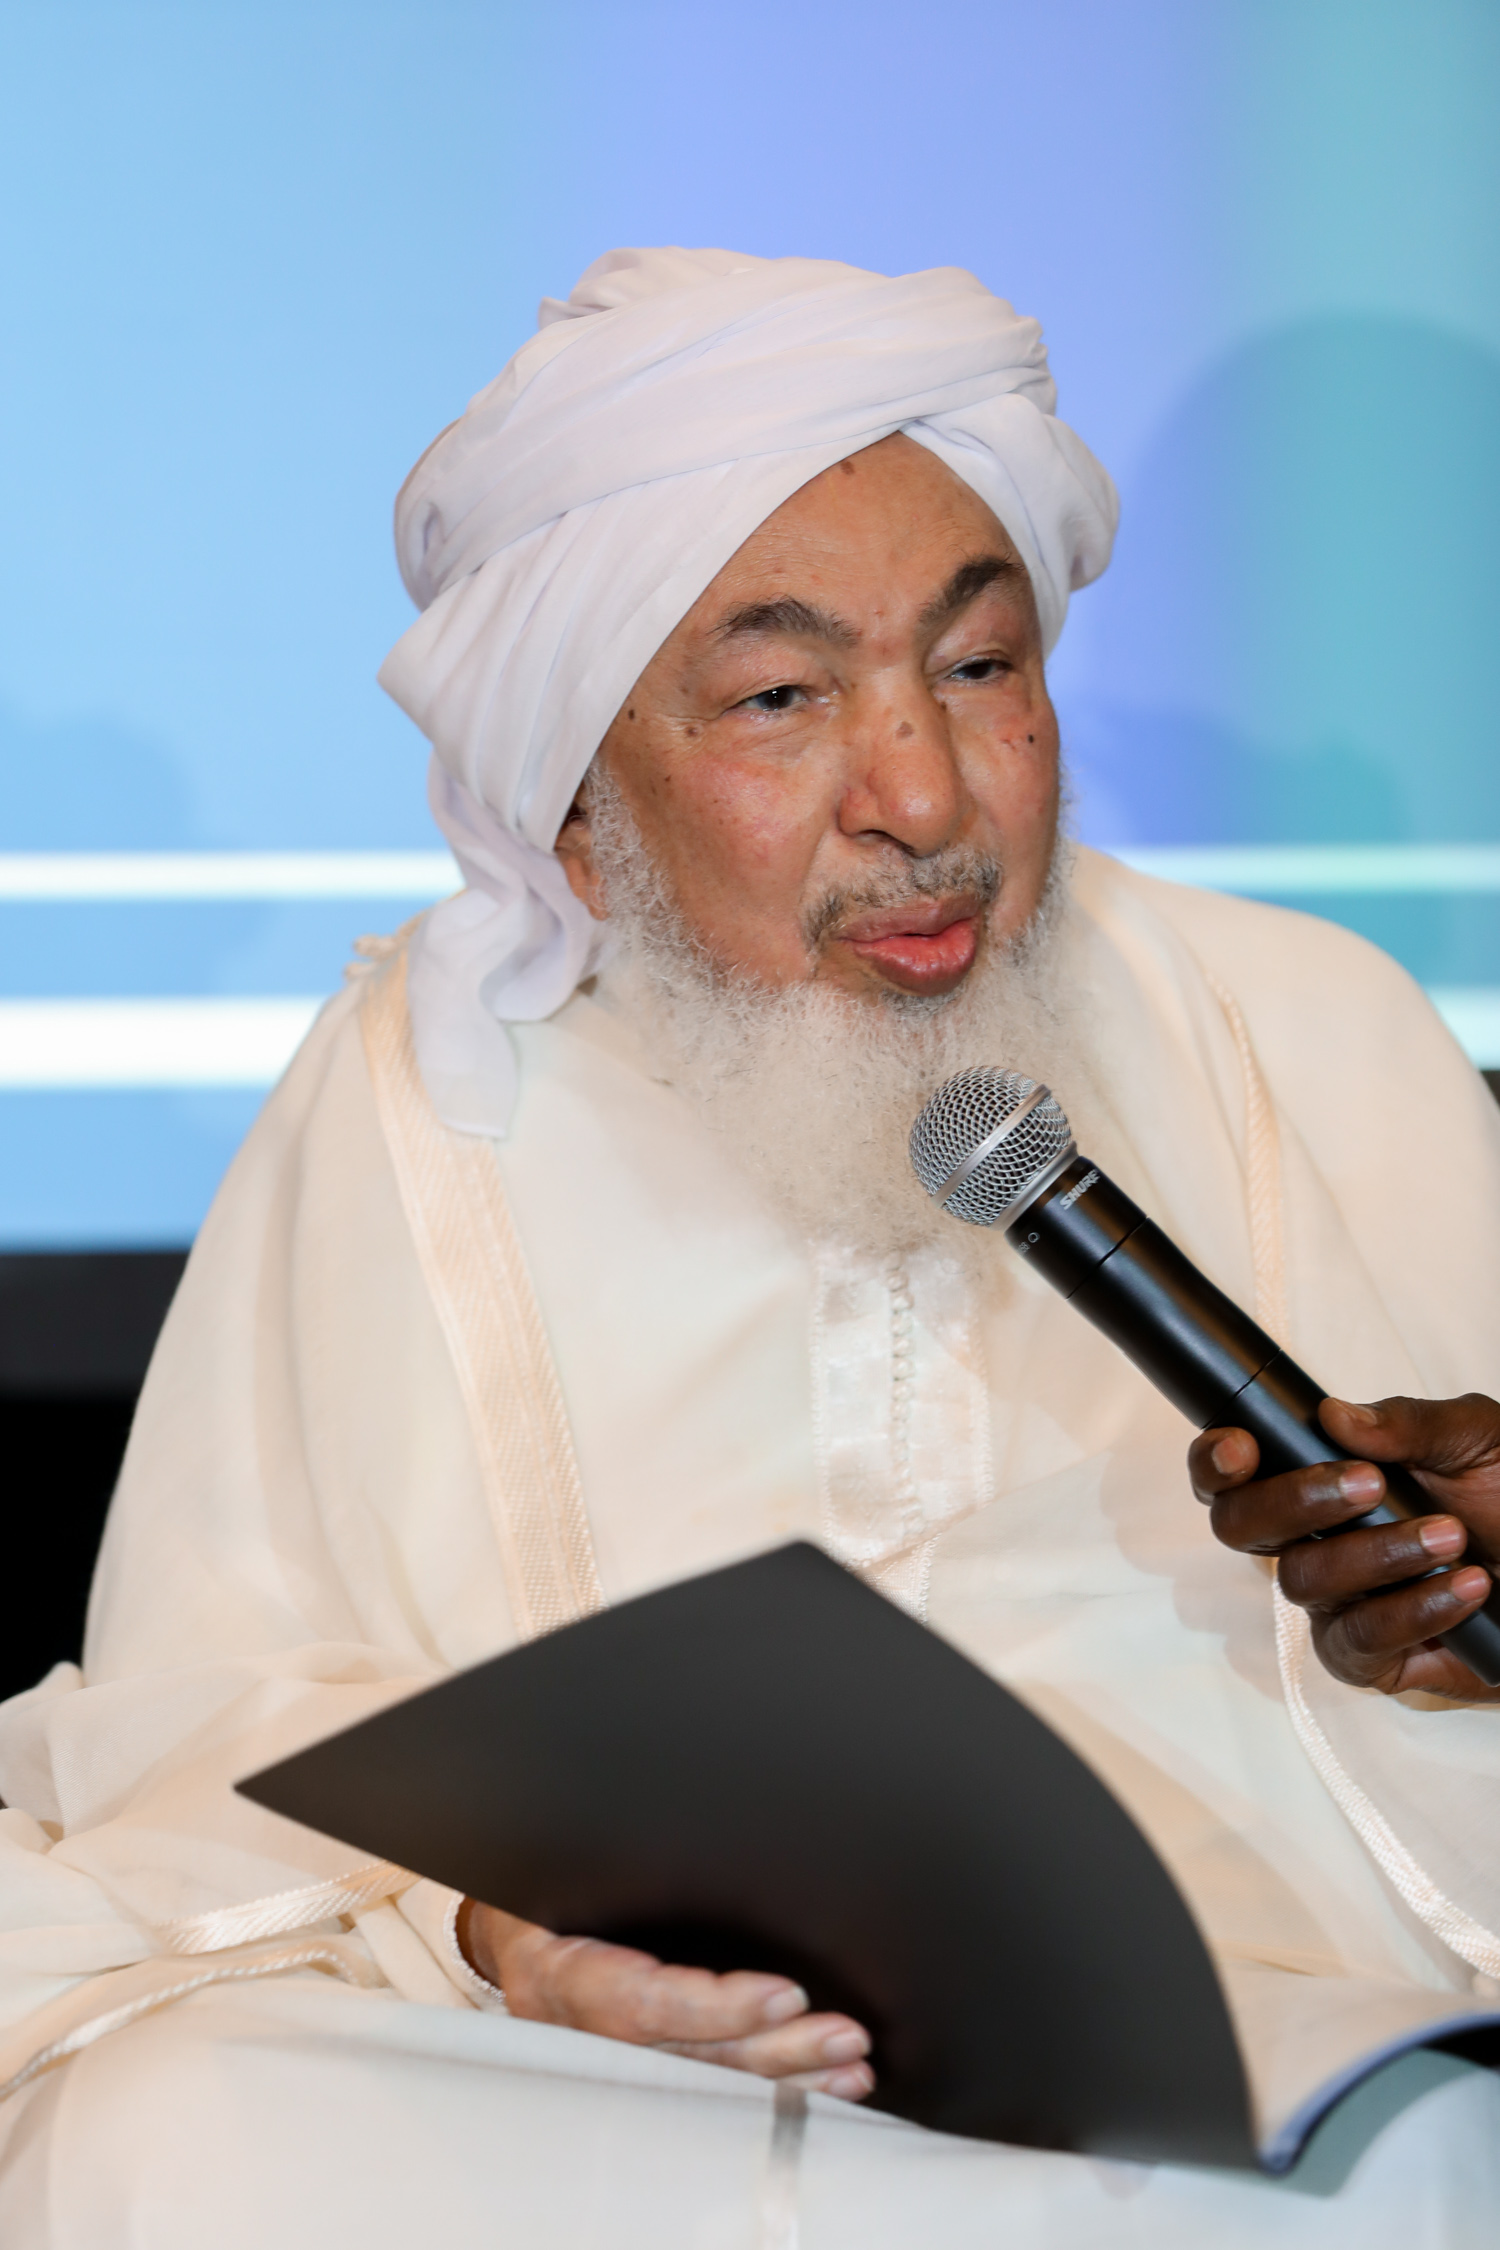 Globally Respected Muslim Scholar Receives Human Dignity Award from American Jewish Committee